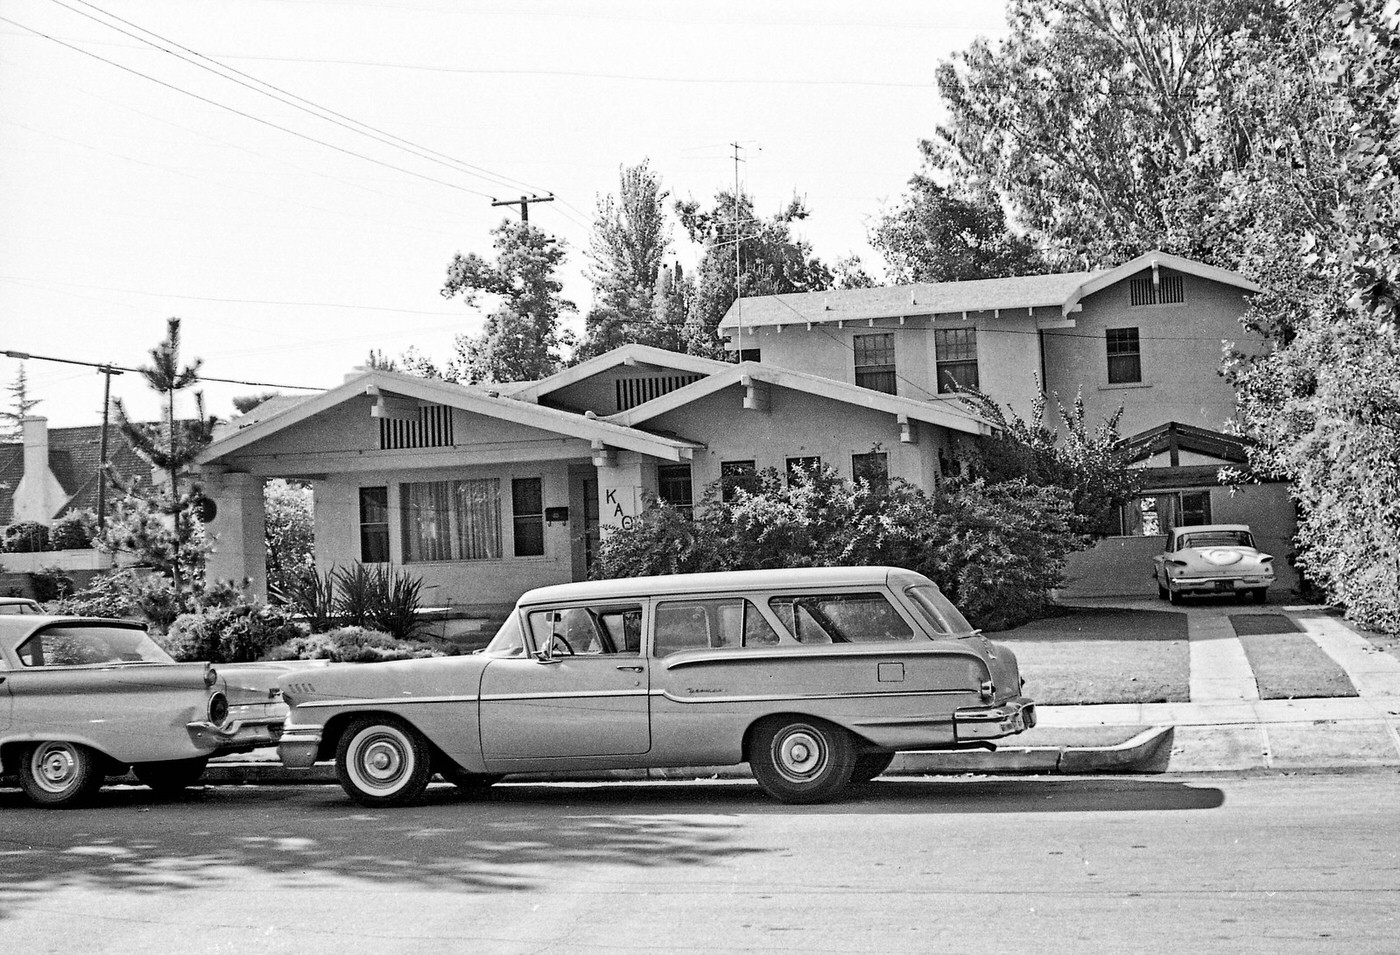 A 1958 Chevy parked on street behind a 1959 Ford in front of the Kappa Alpha Theta sorority house in the older part of Fresno near Fresno City College.